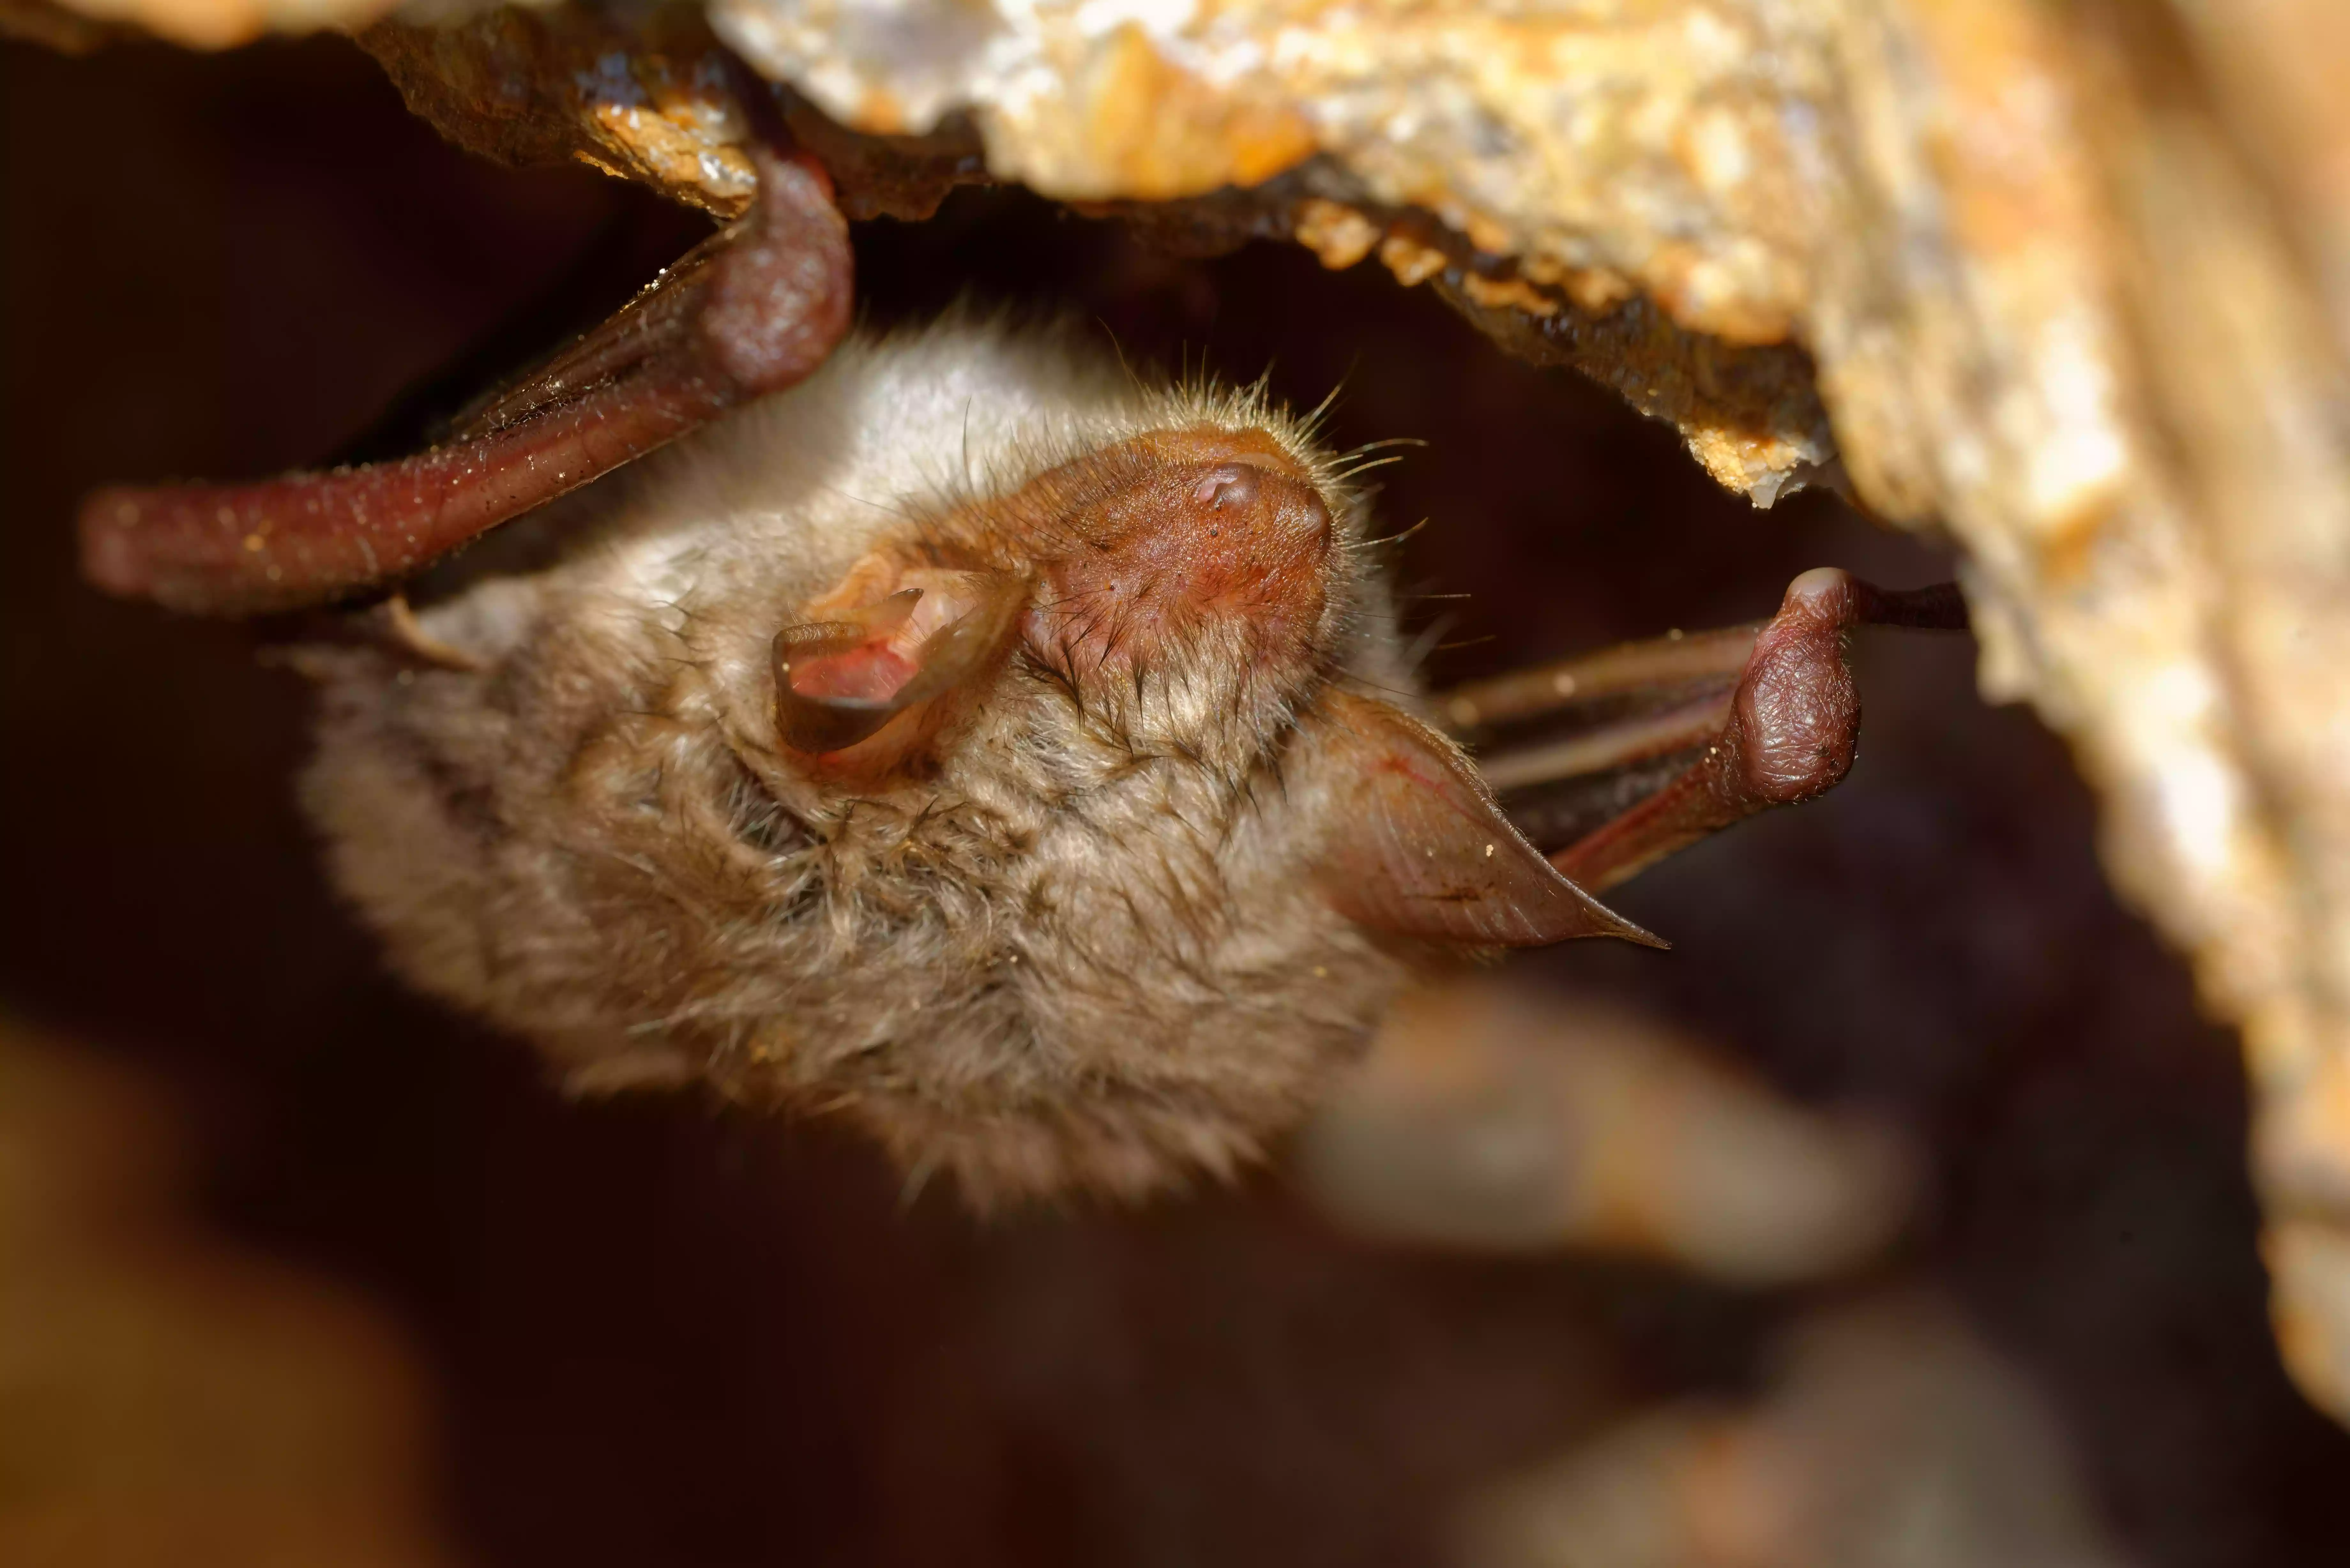 The greater mouse-eared bat, which can live up to 22 years in the wild